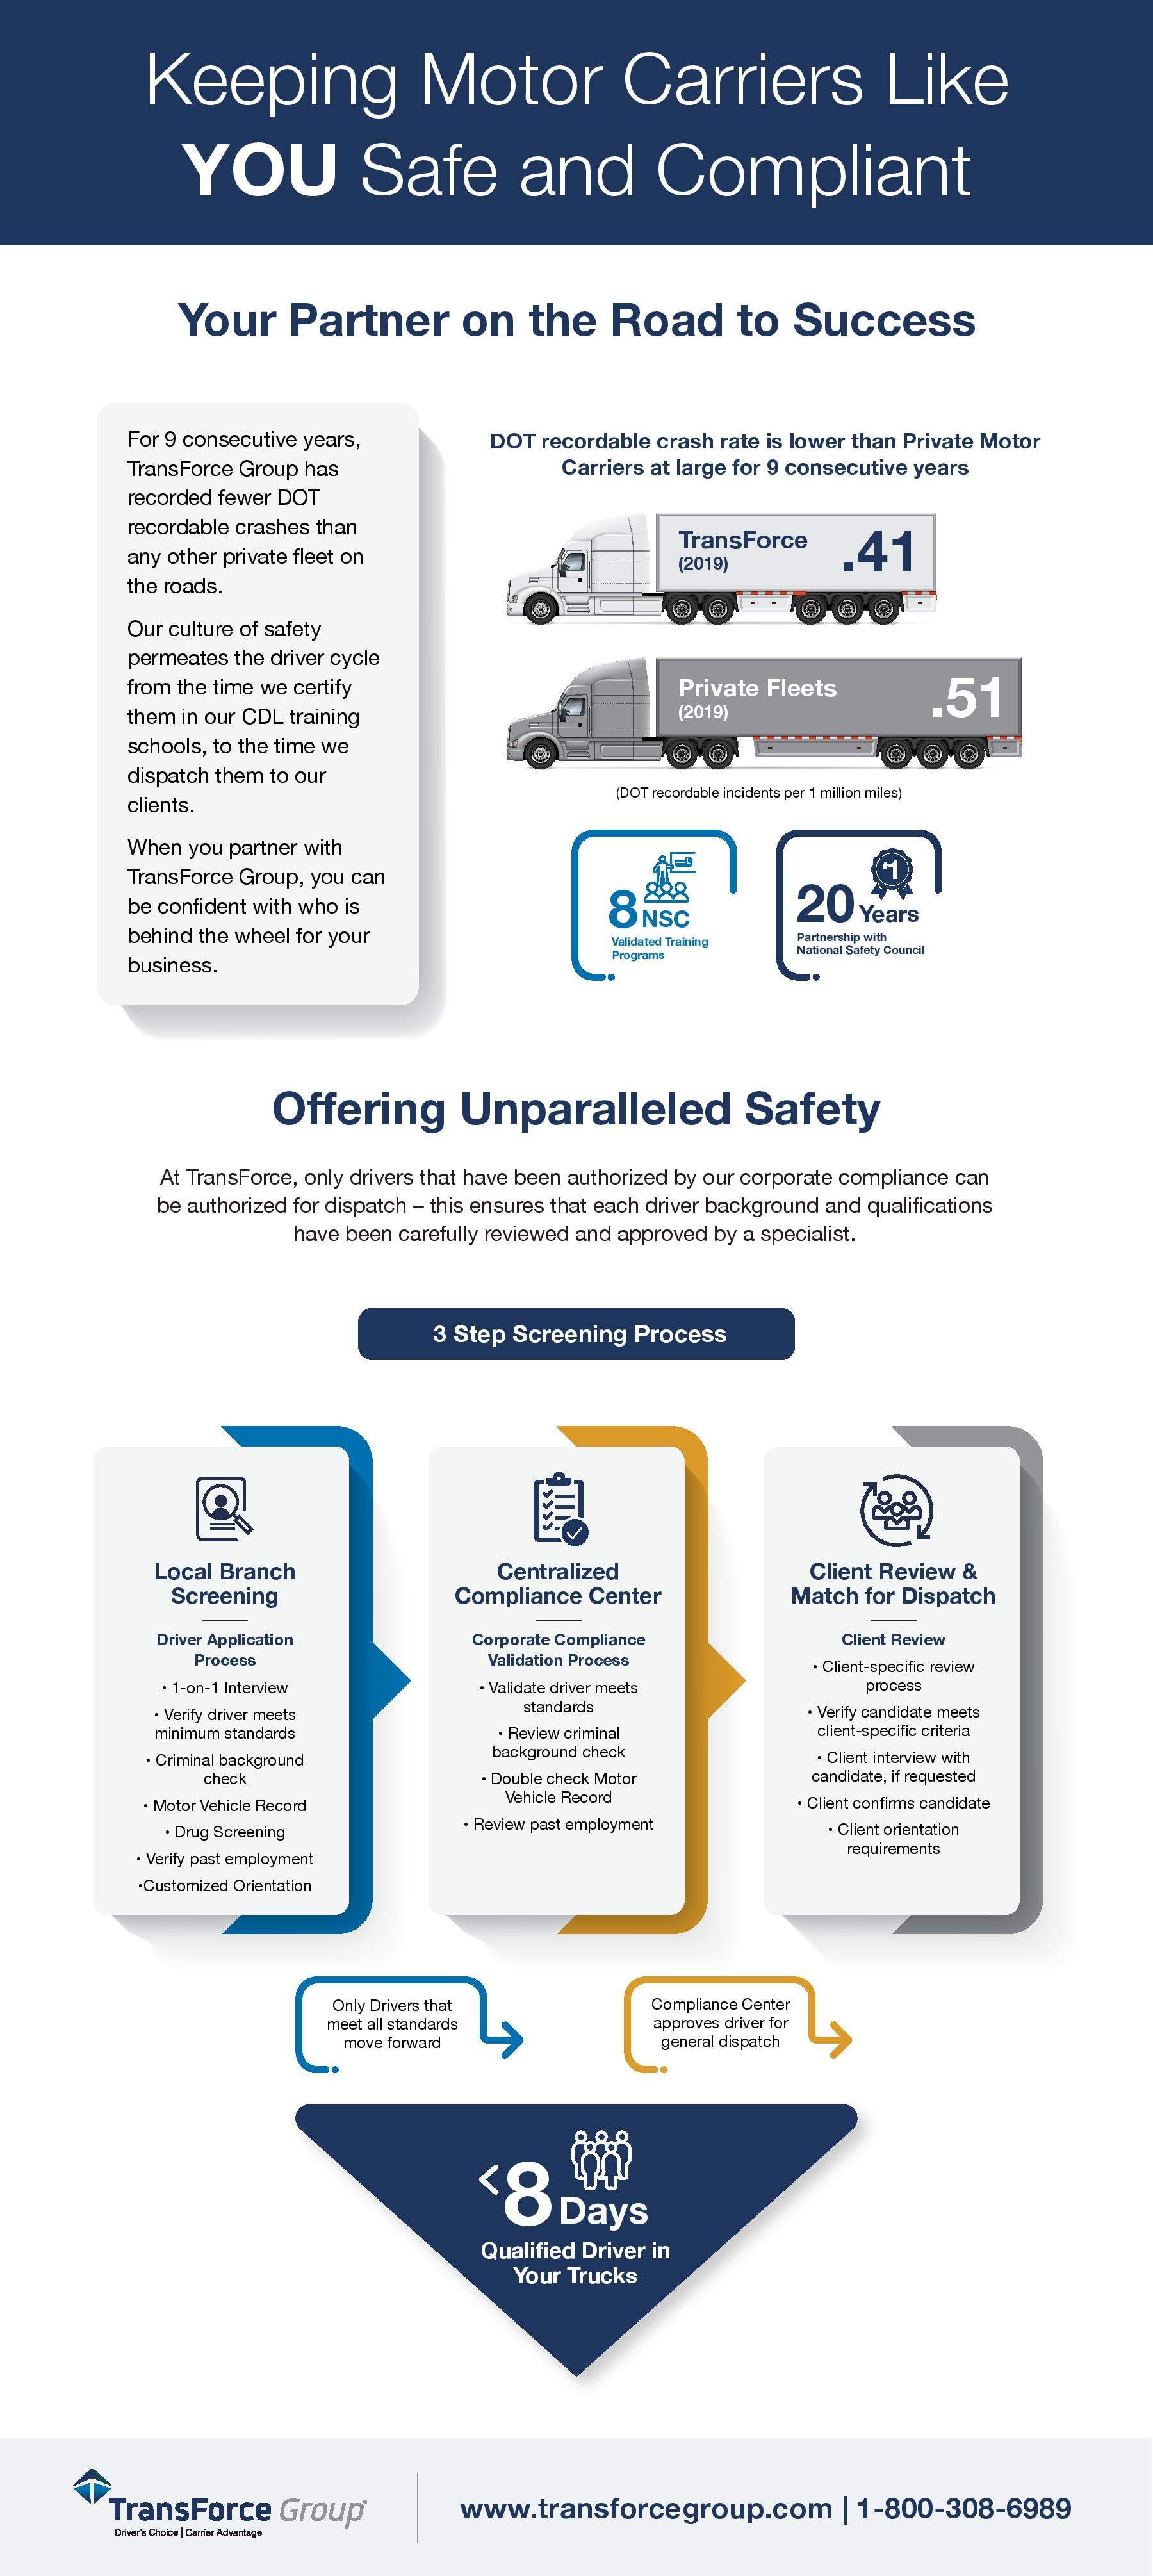 Keeping motor carriers like you safe and compliant